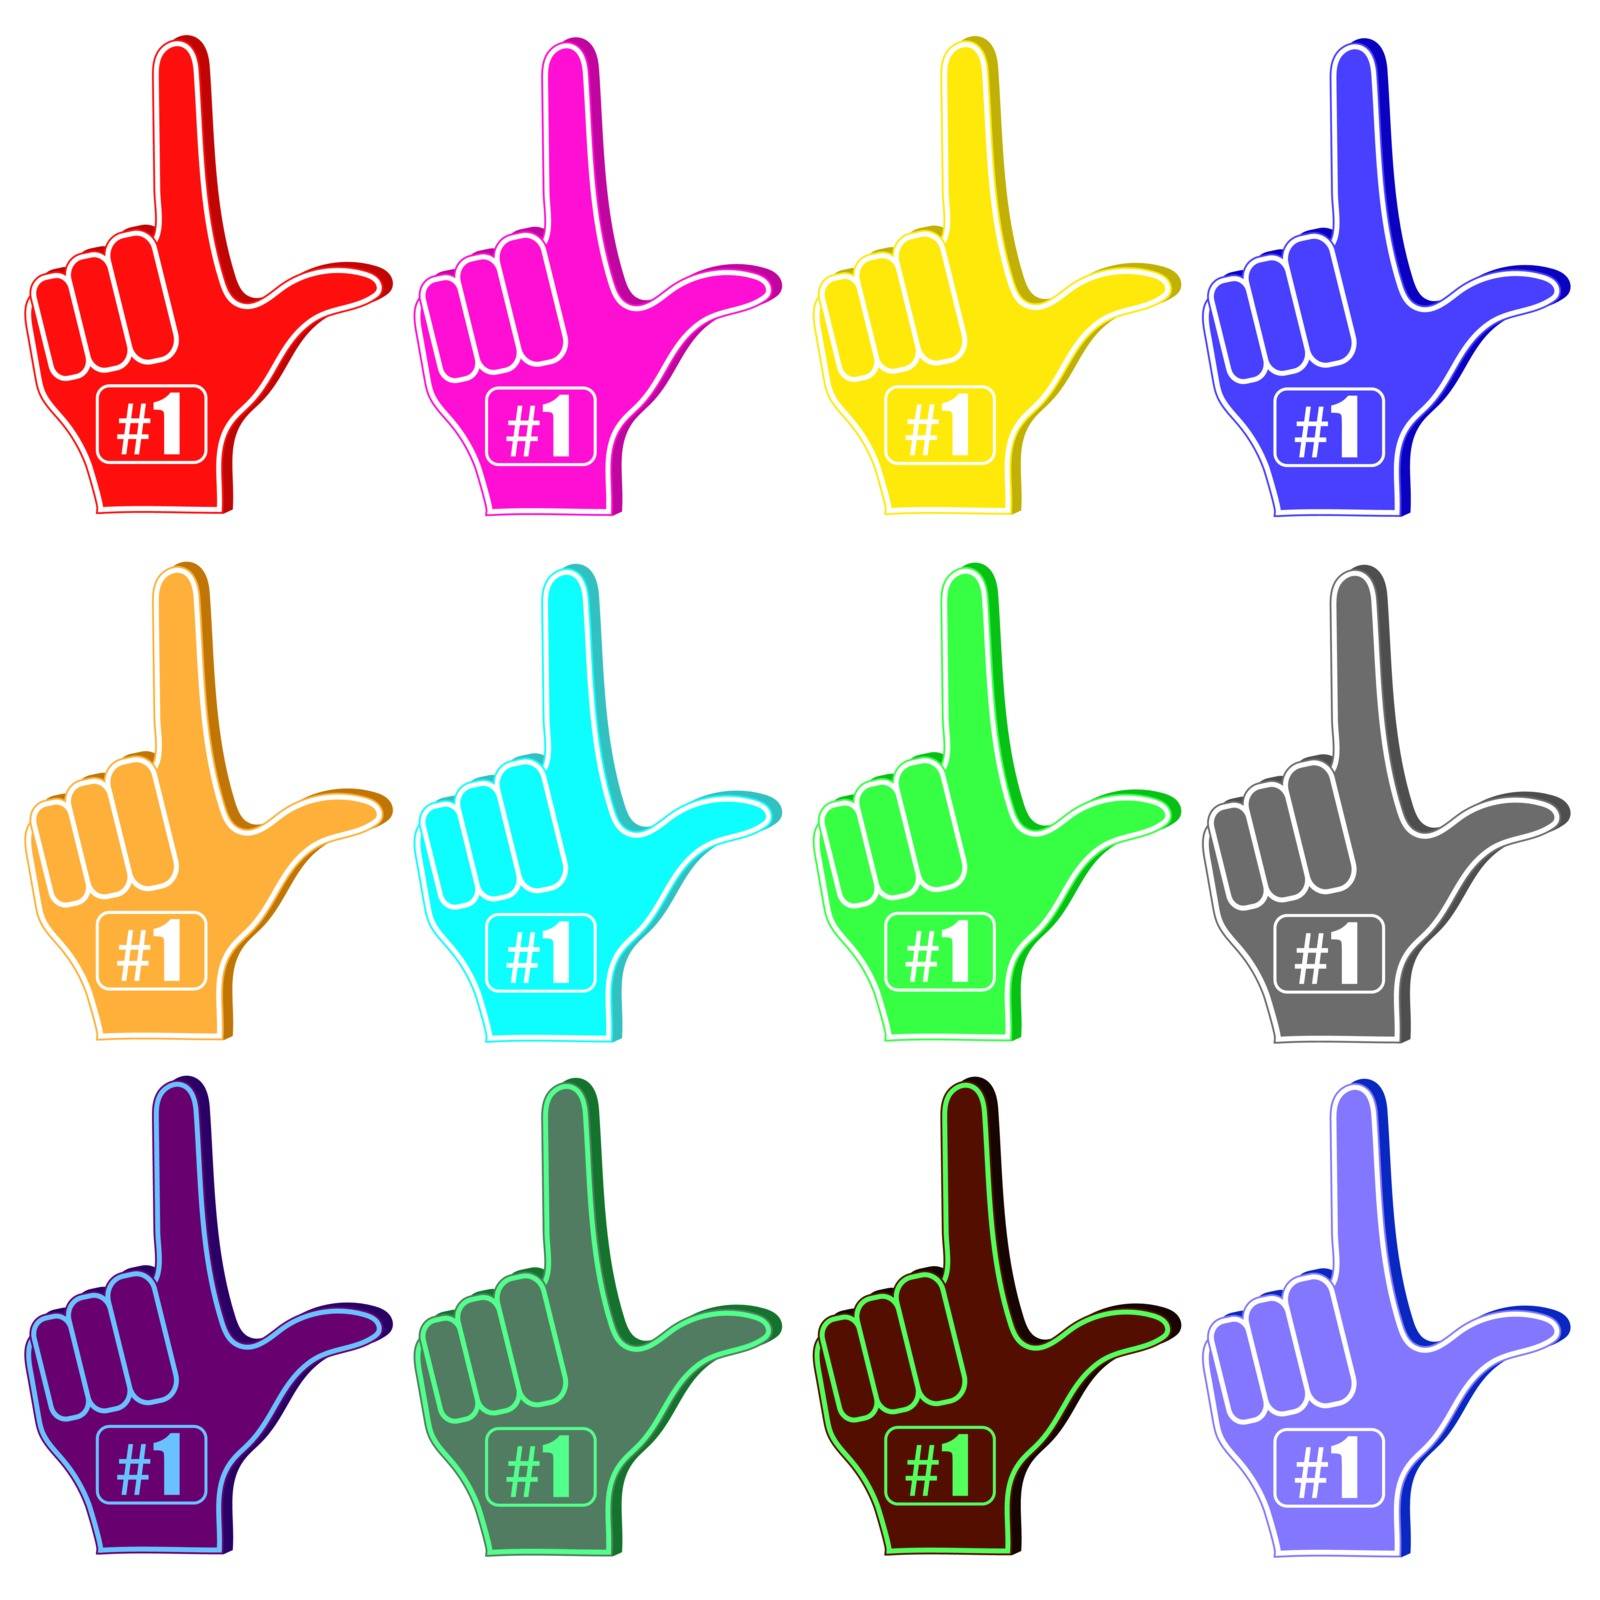 Foam Fingers Silhouettes Isolated on White Background